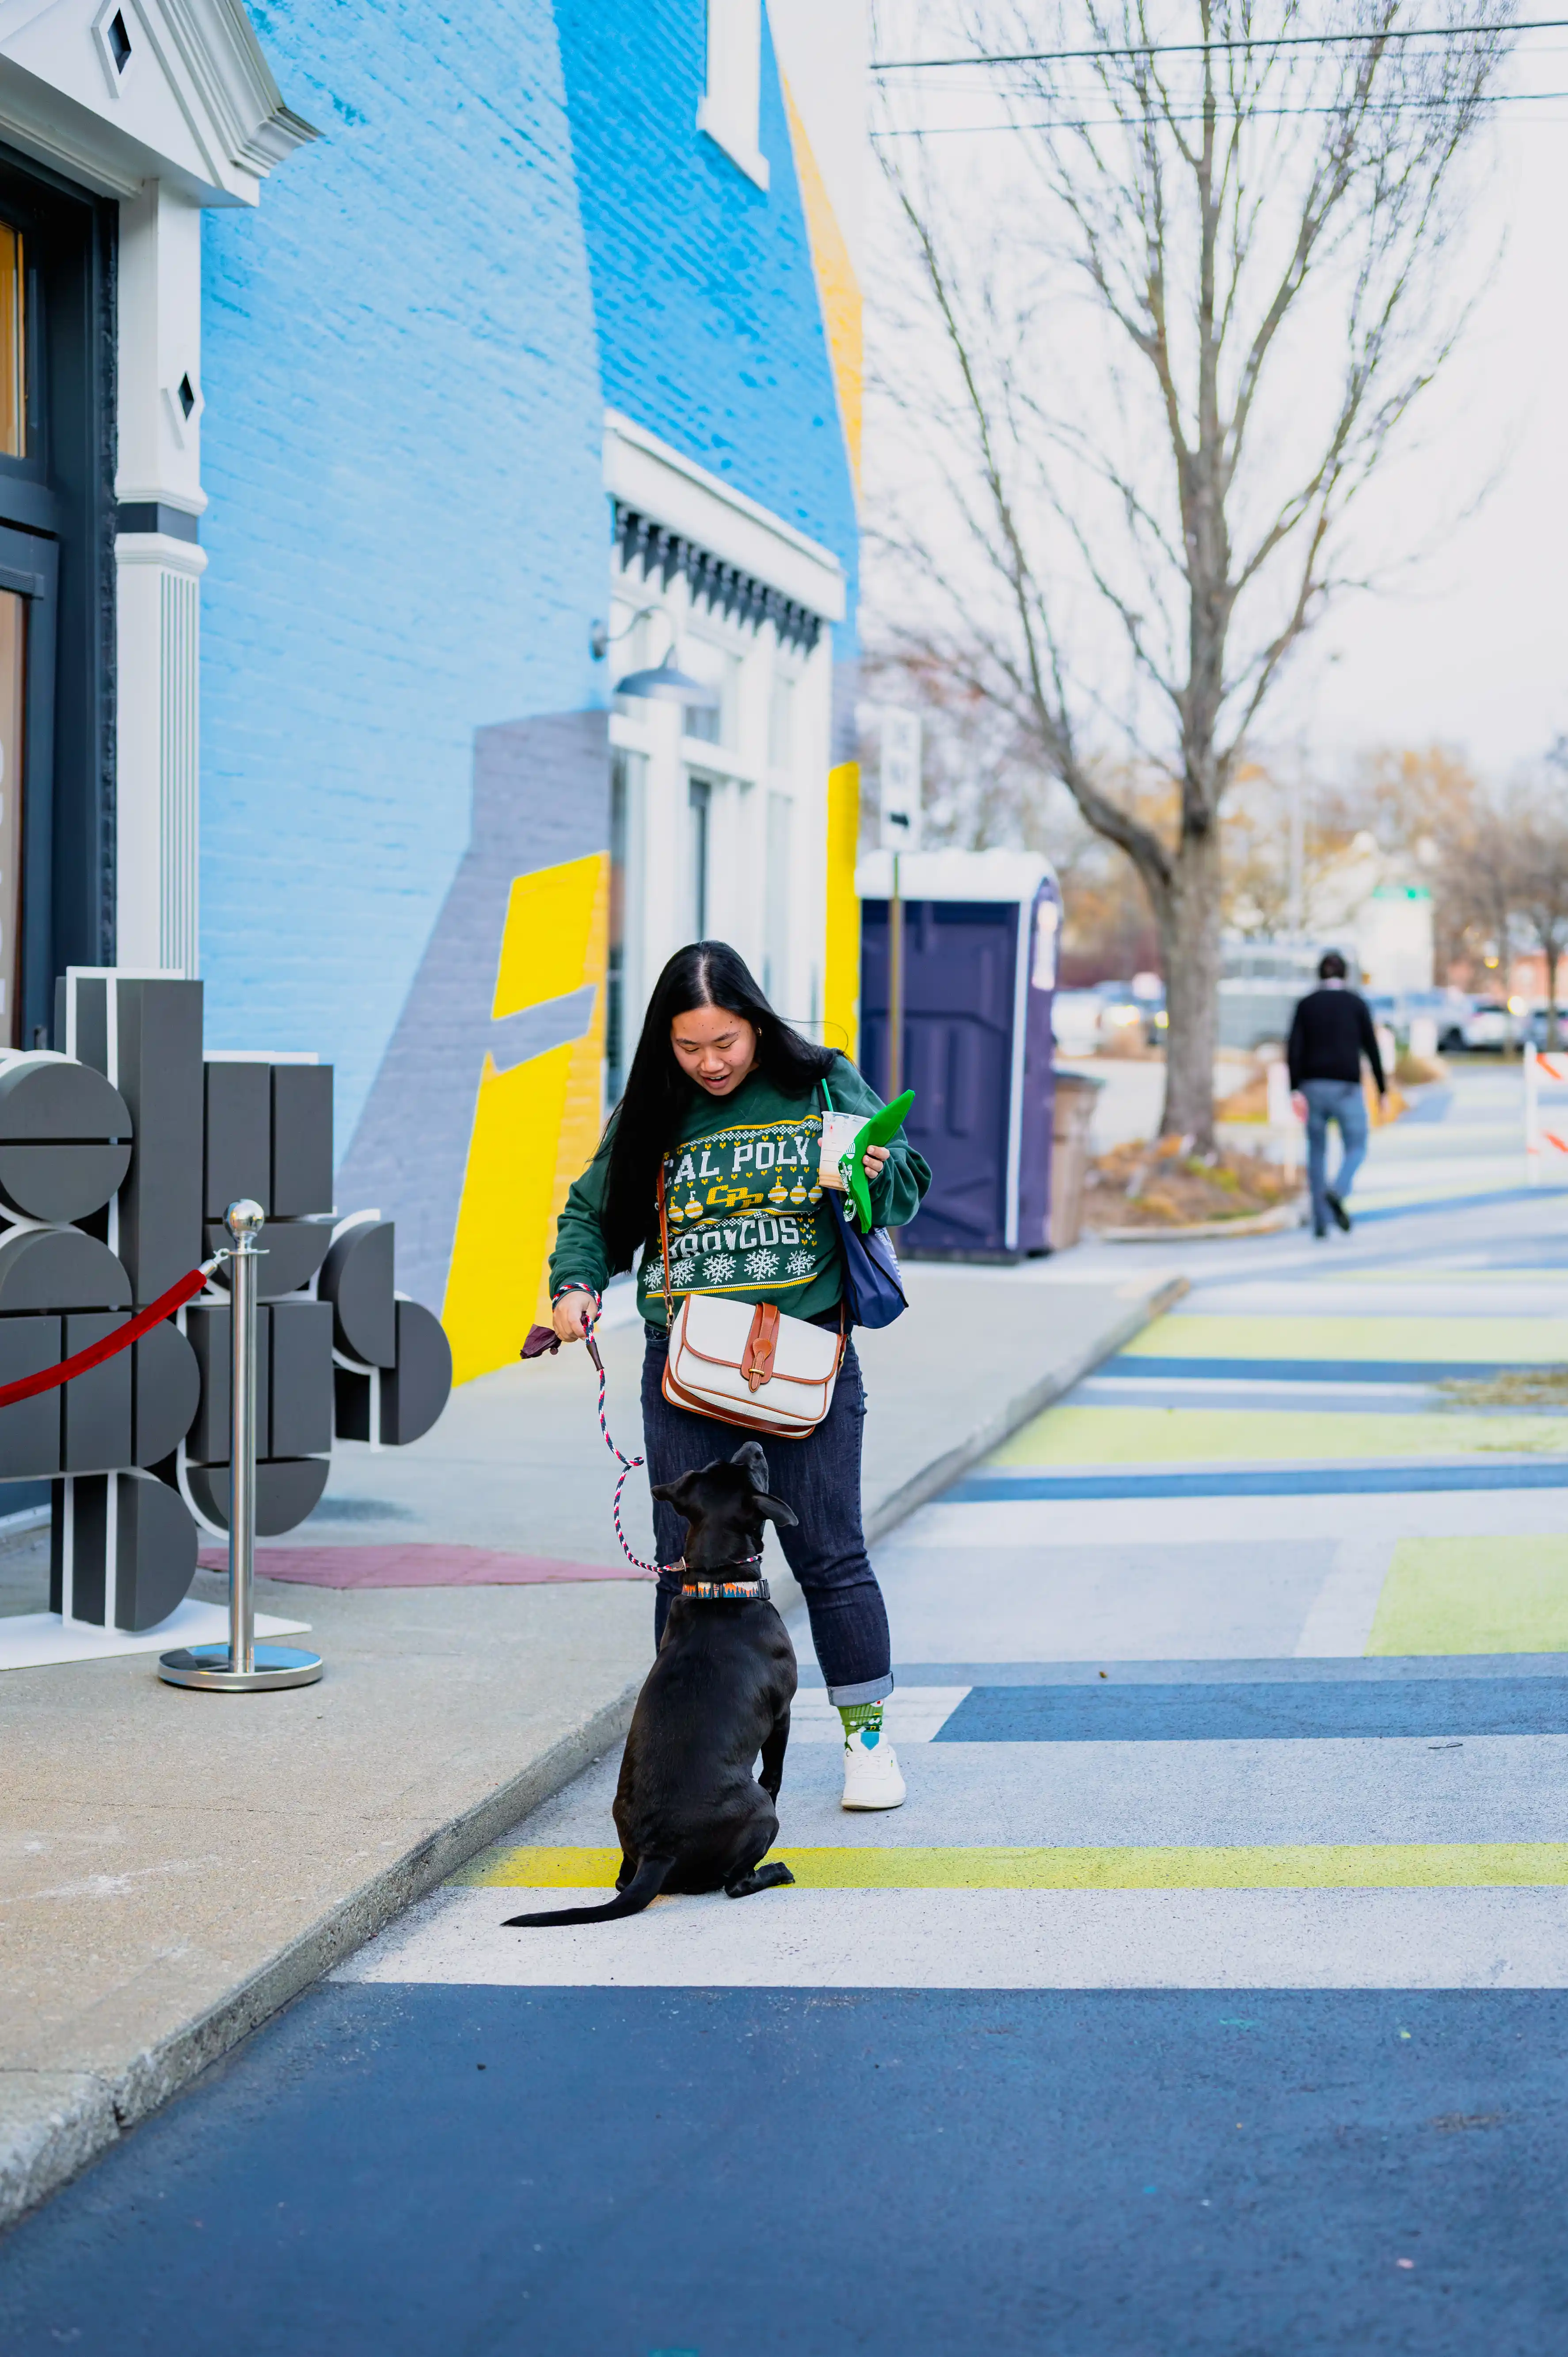 A person walking a black dog on a colorful crosswalk in an urban setting with a blue building in the background.